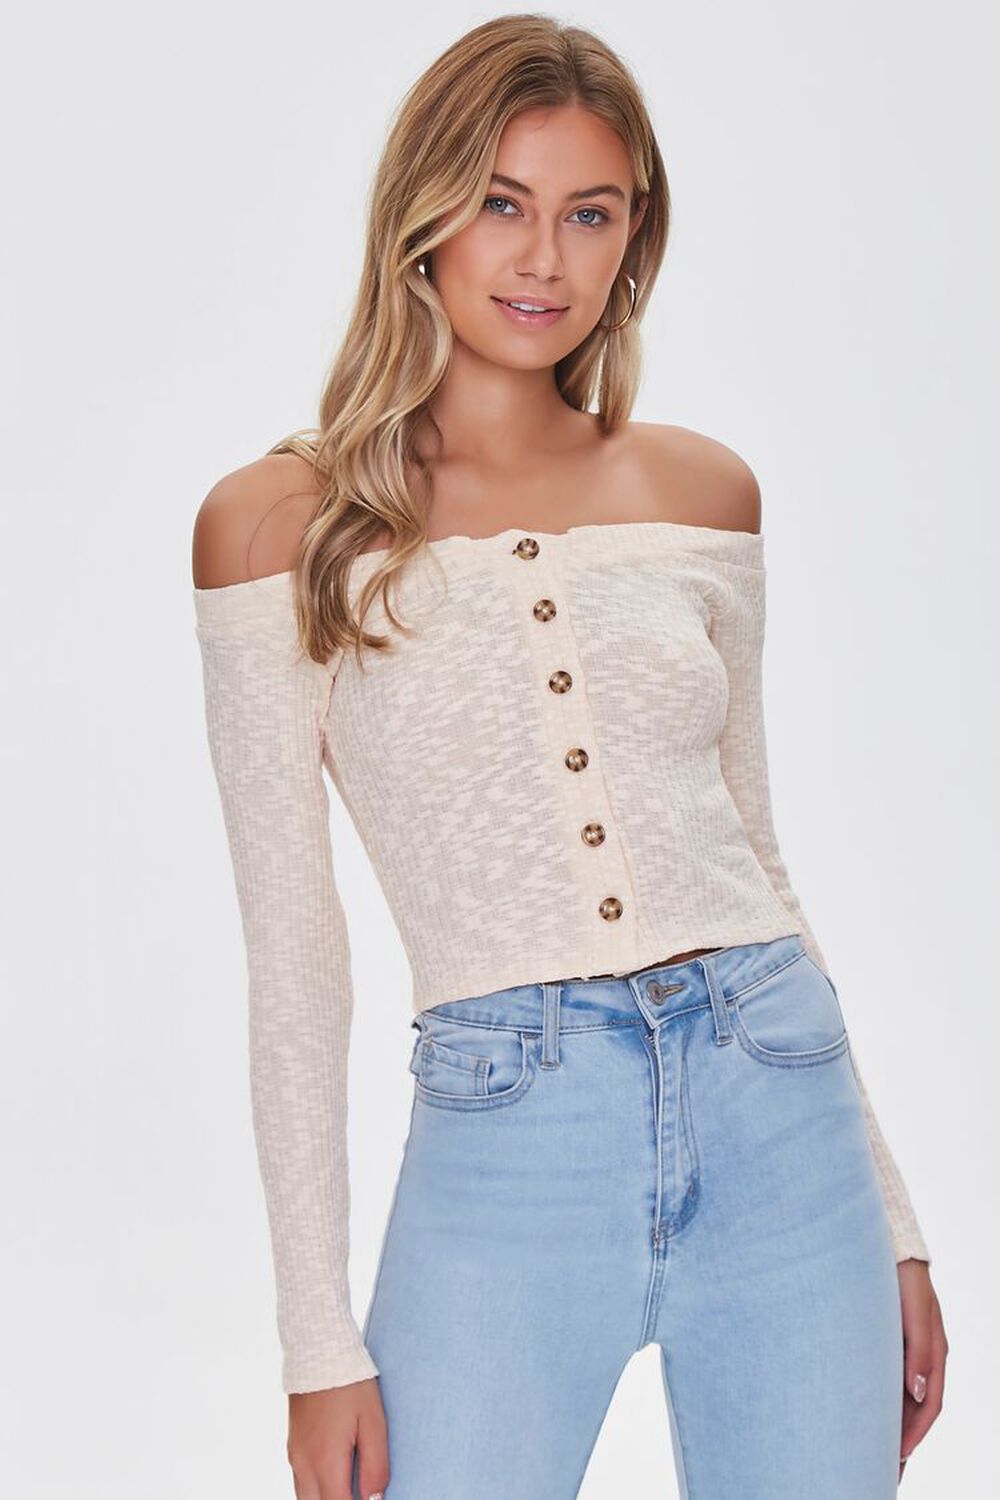 CREAM Ribbed Off-the-Shoulder Top, image 1